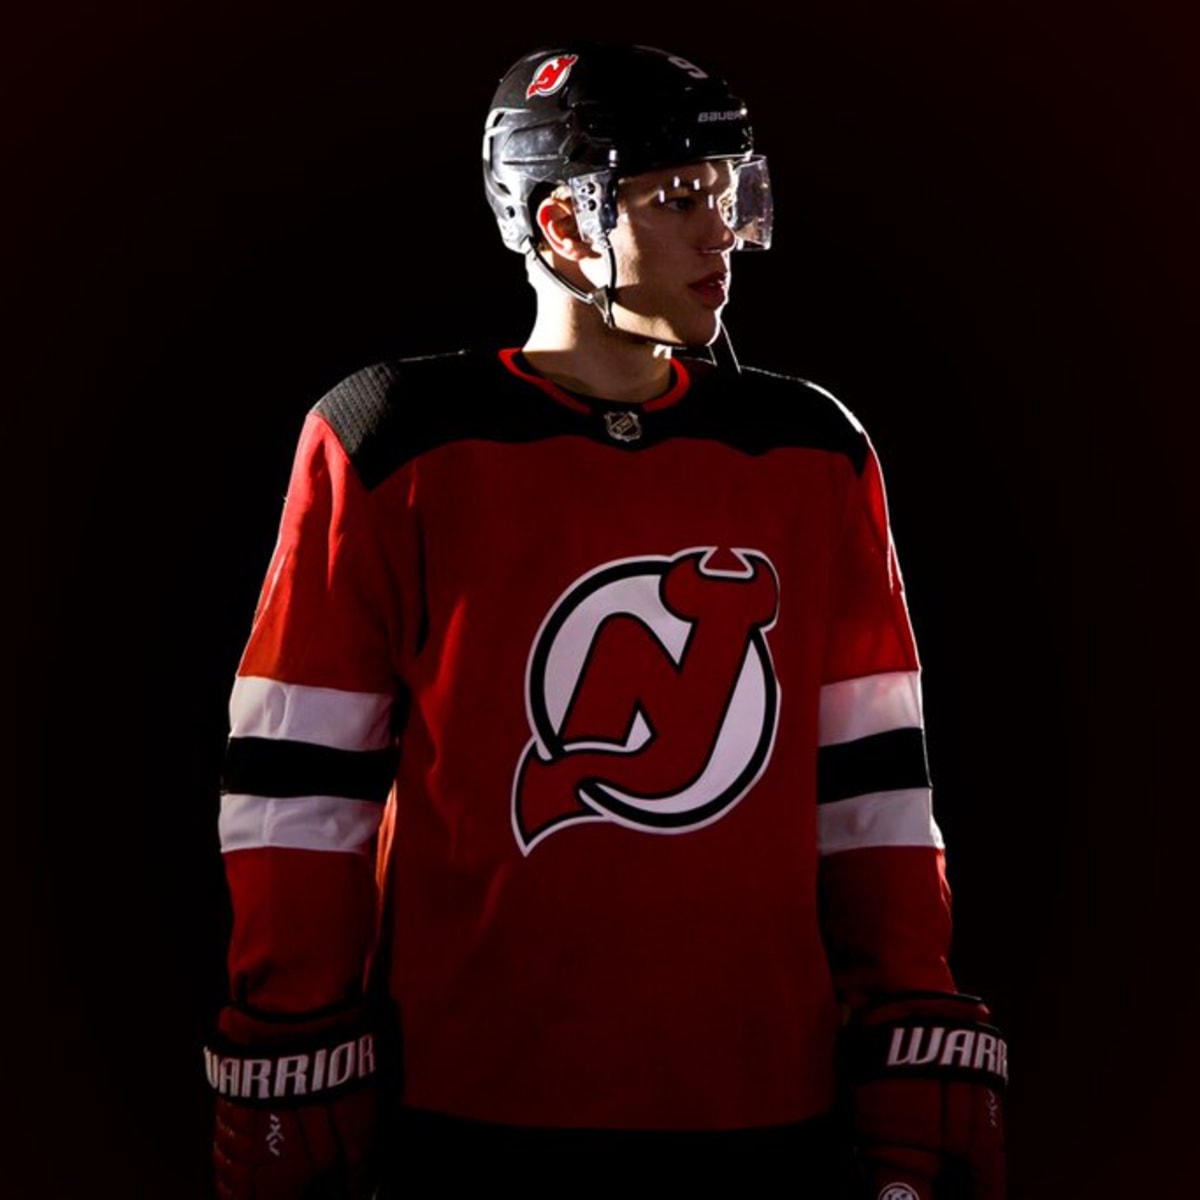 New Jersey Devils Disappoint With Unwhelming New Third Uniform –  SportsLogos.Net News